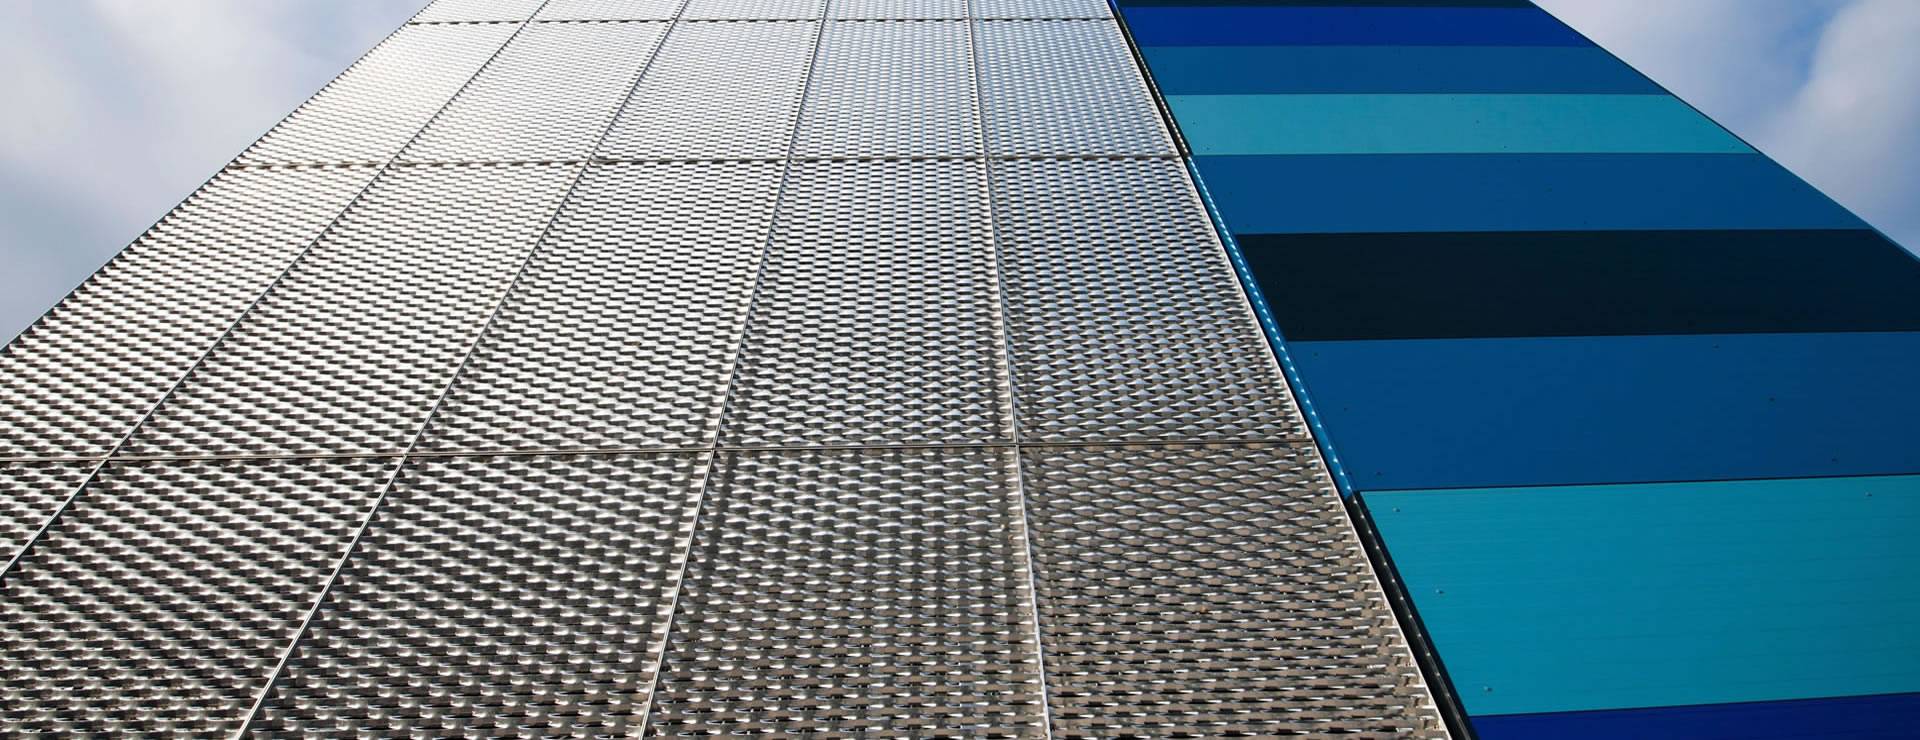 Raised expanded metal meshes with diamond holes are installed on the facades.